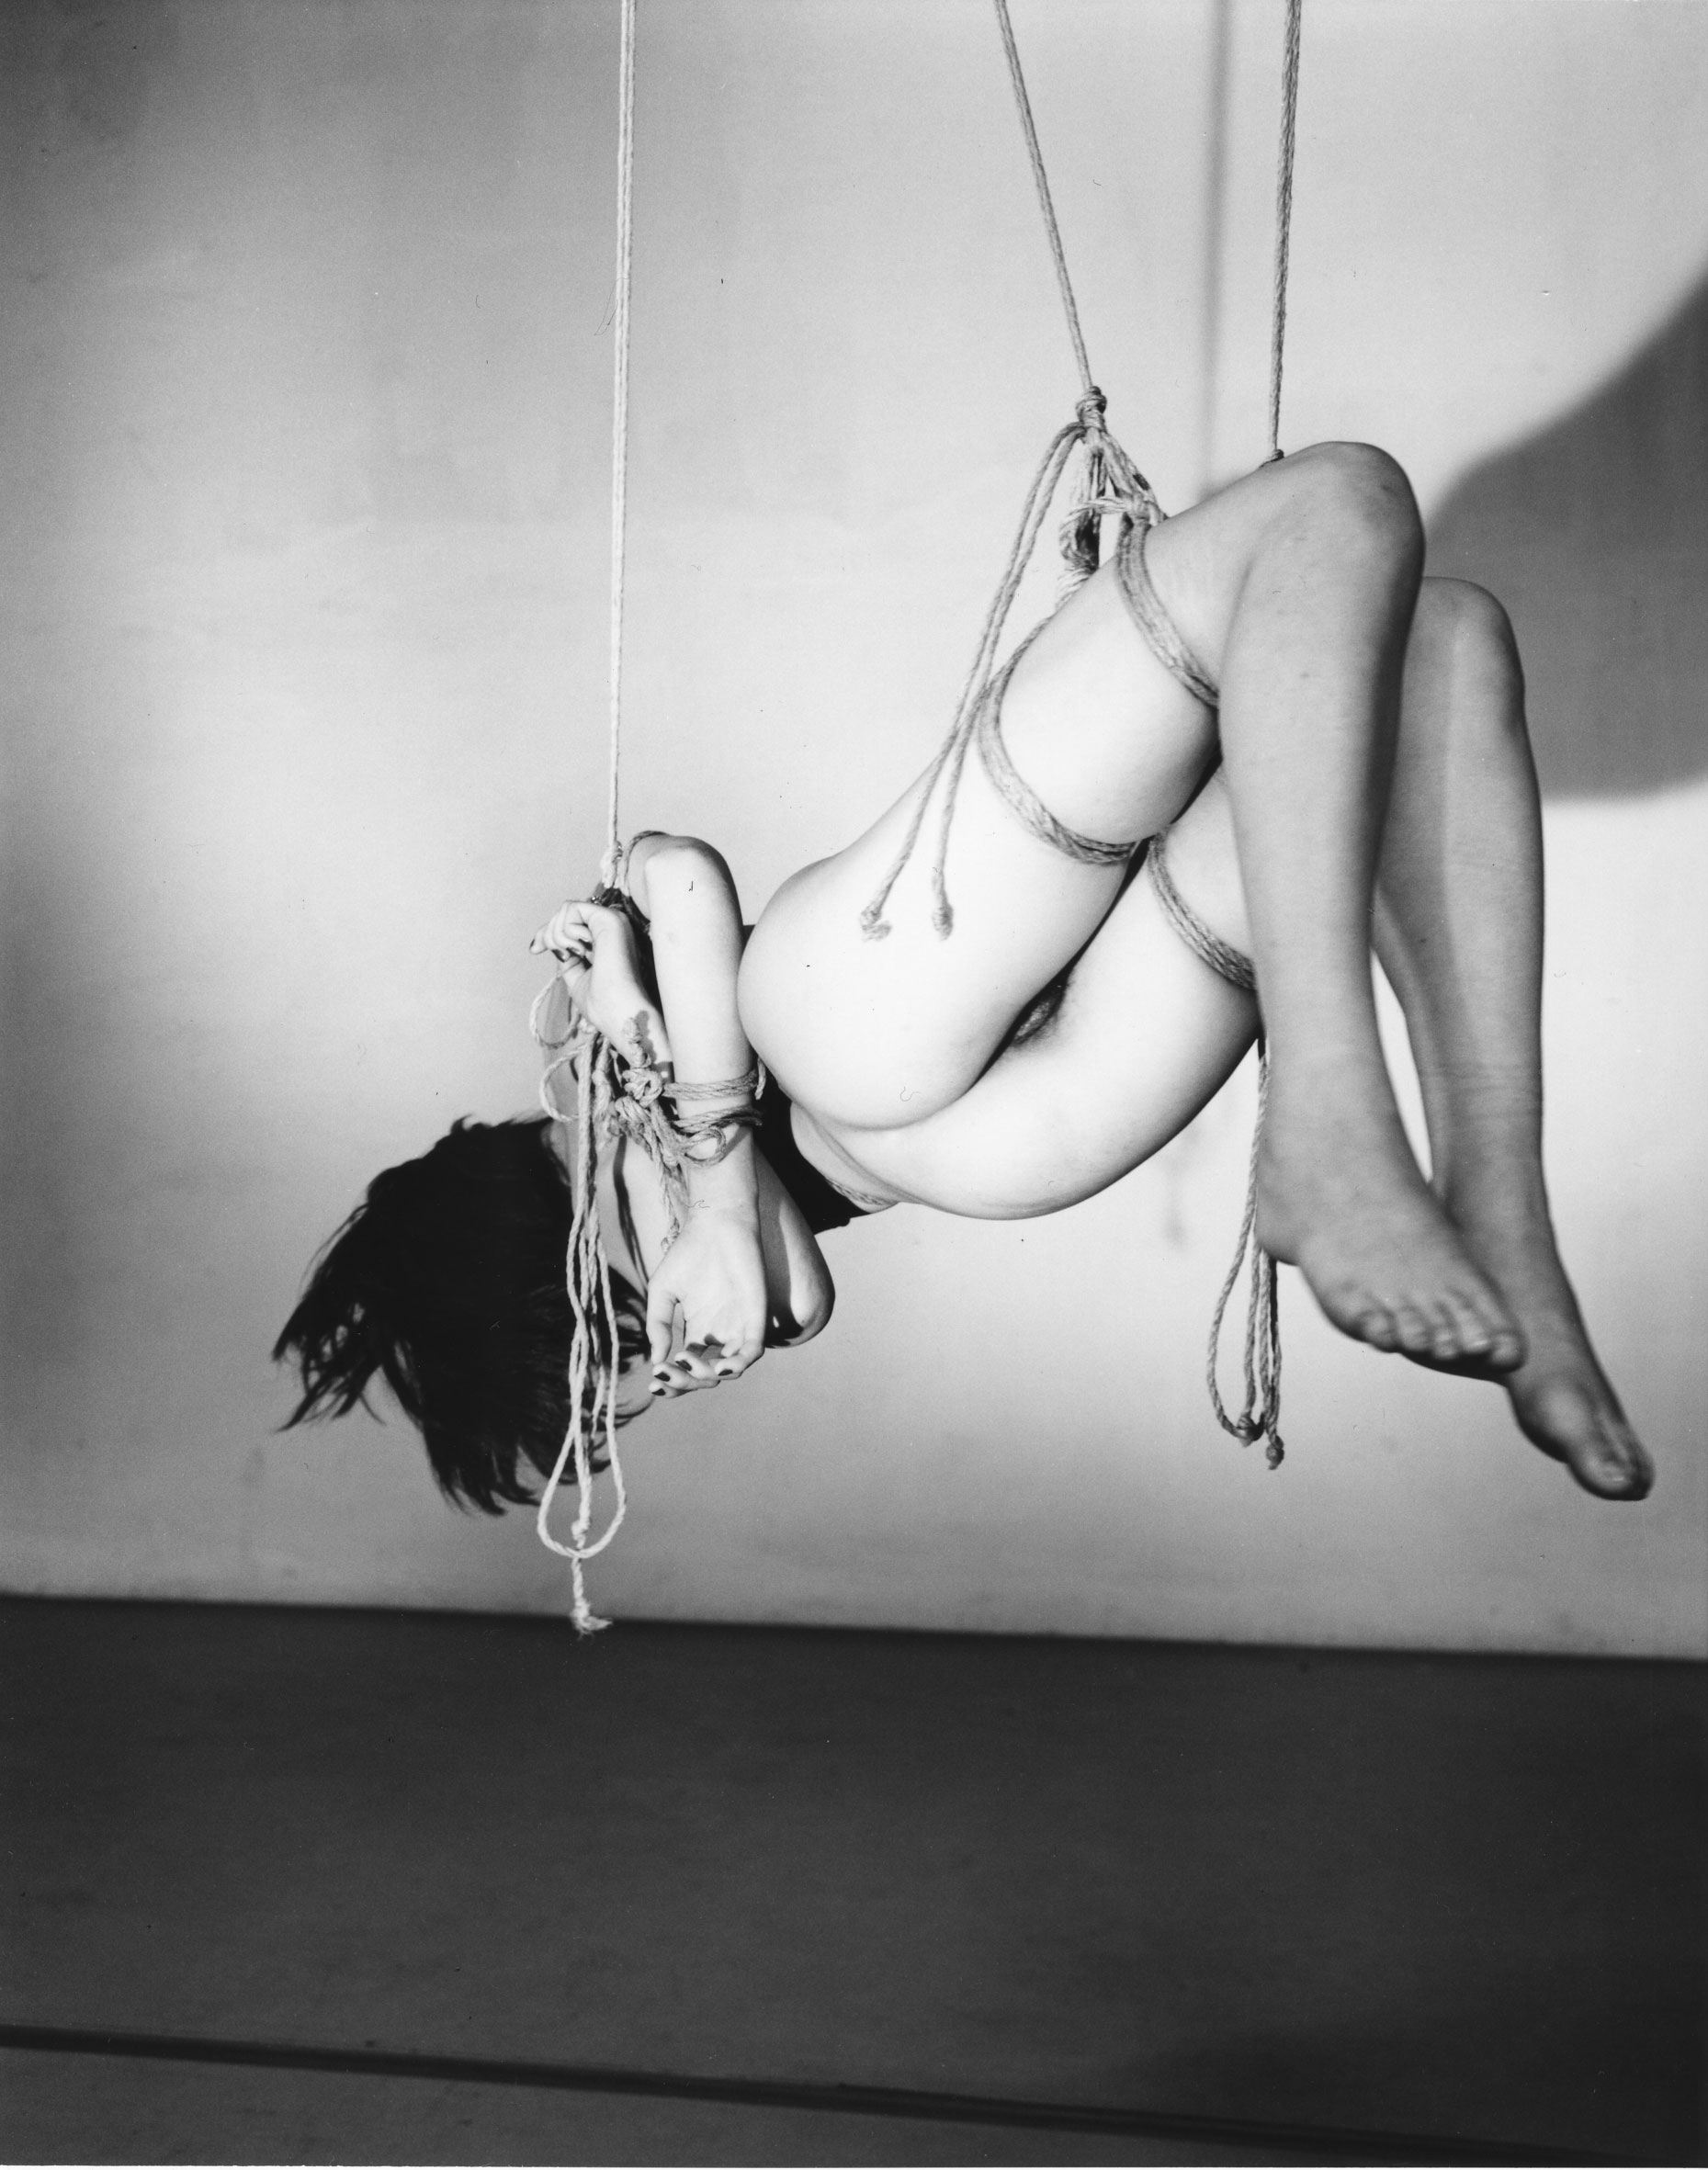 Photograph of a bound, naked woman hanging